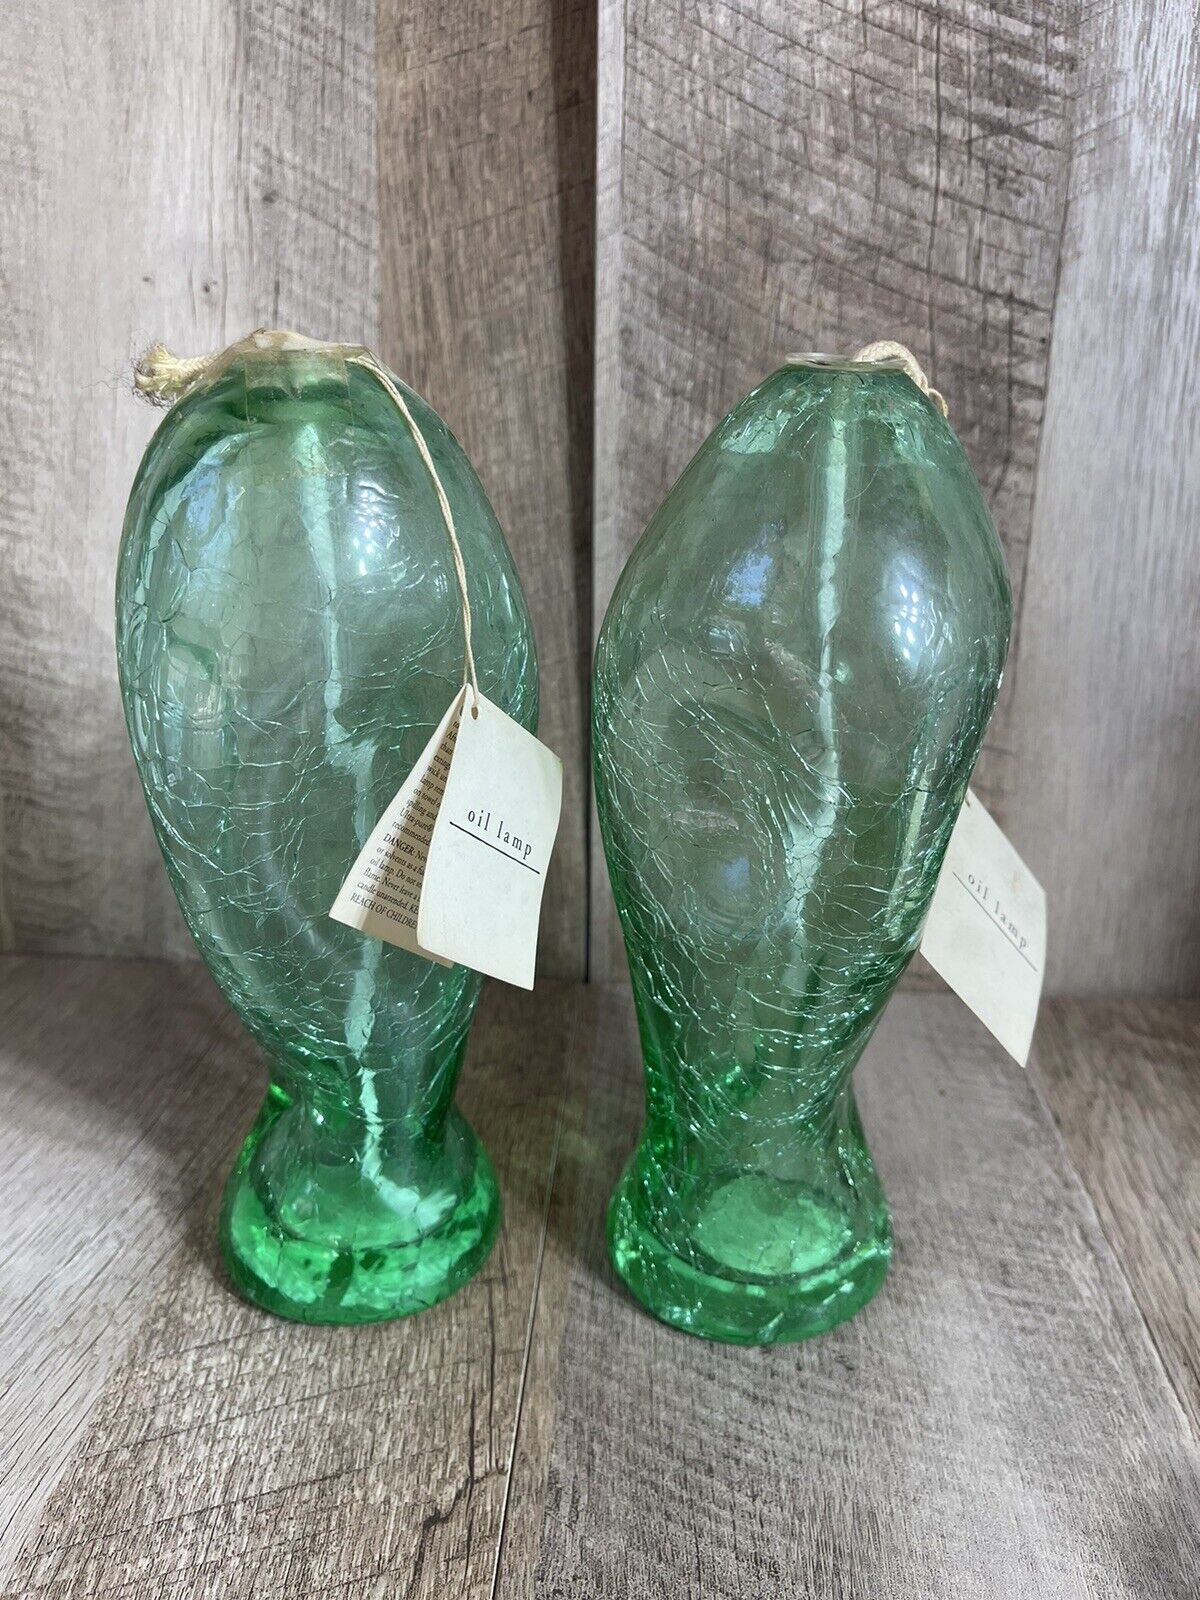 Pier 1 Imports Green Crackle Glass Oil Lamp Pair With Tags